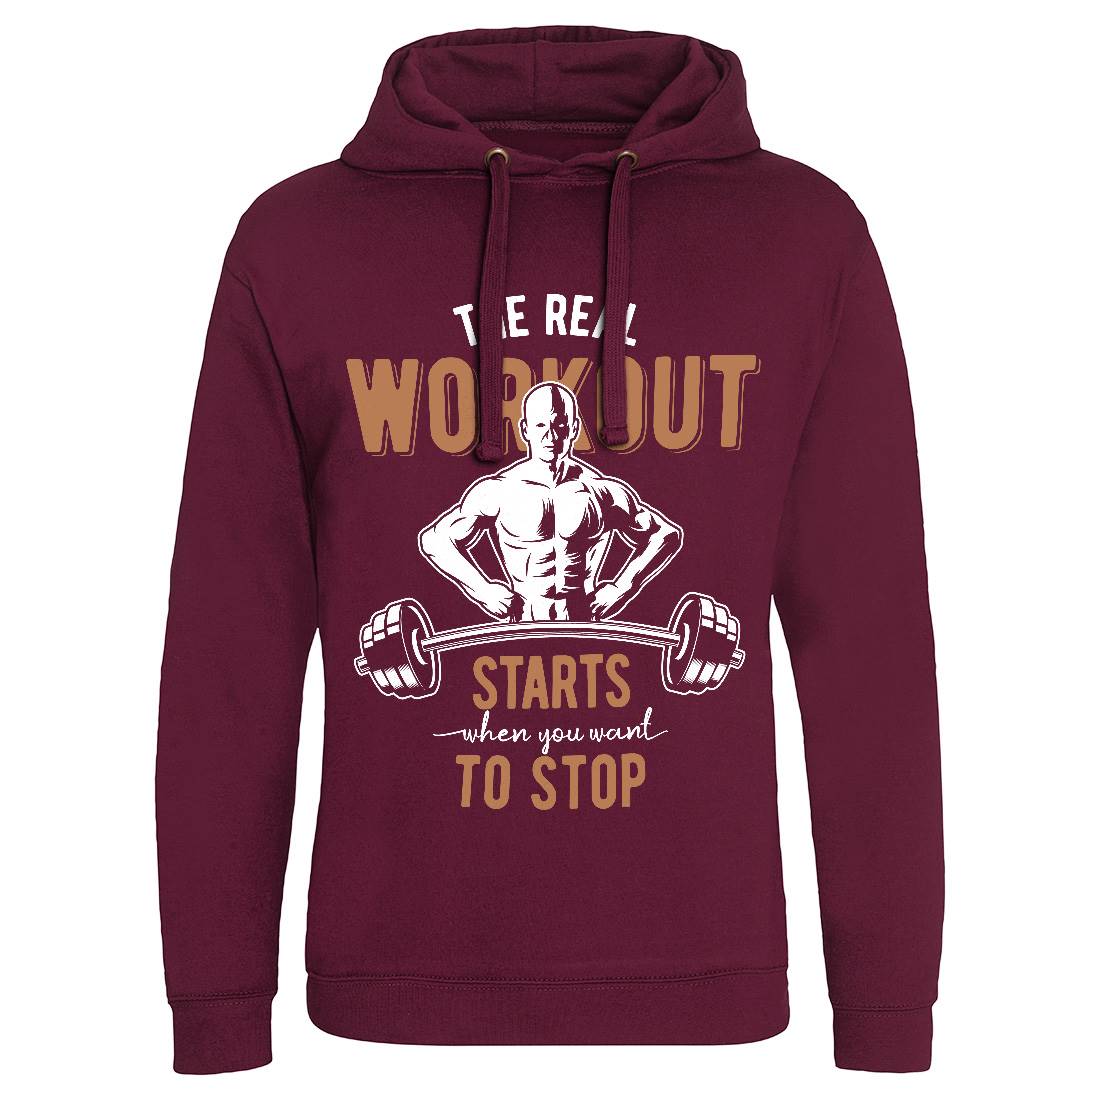 Workout Mens Hoodie Without Pocket Gym B302